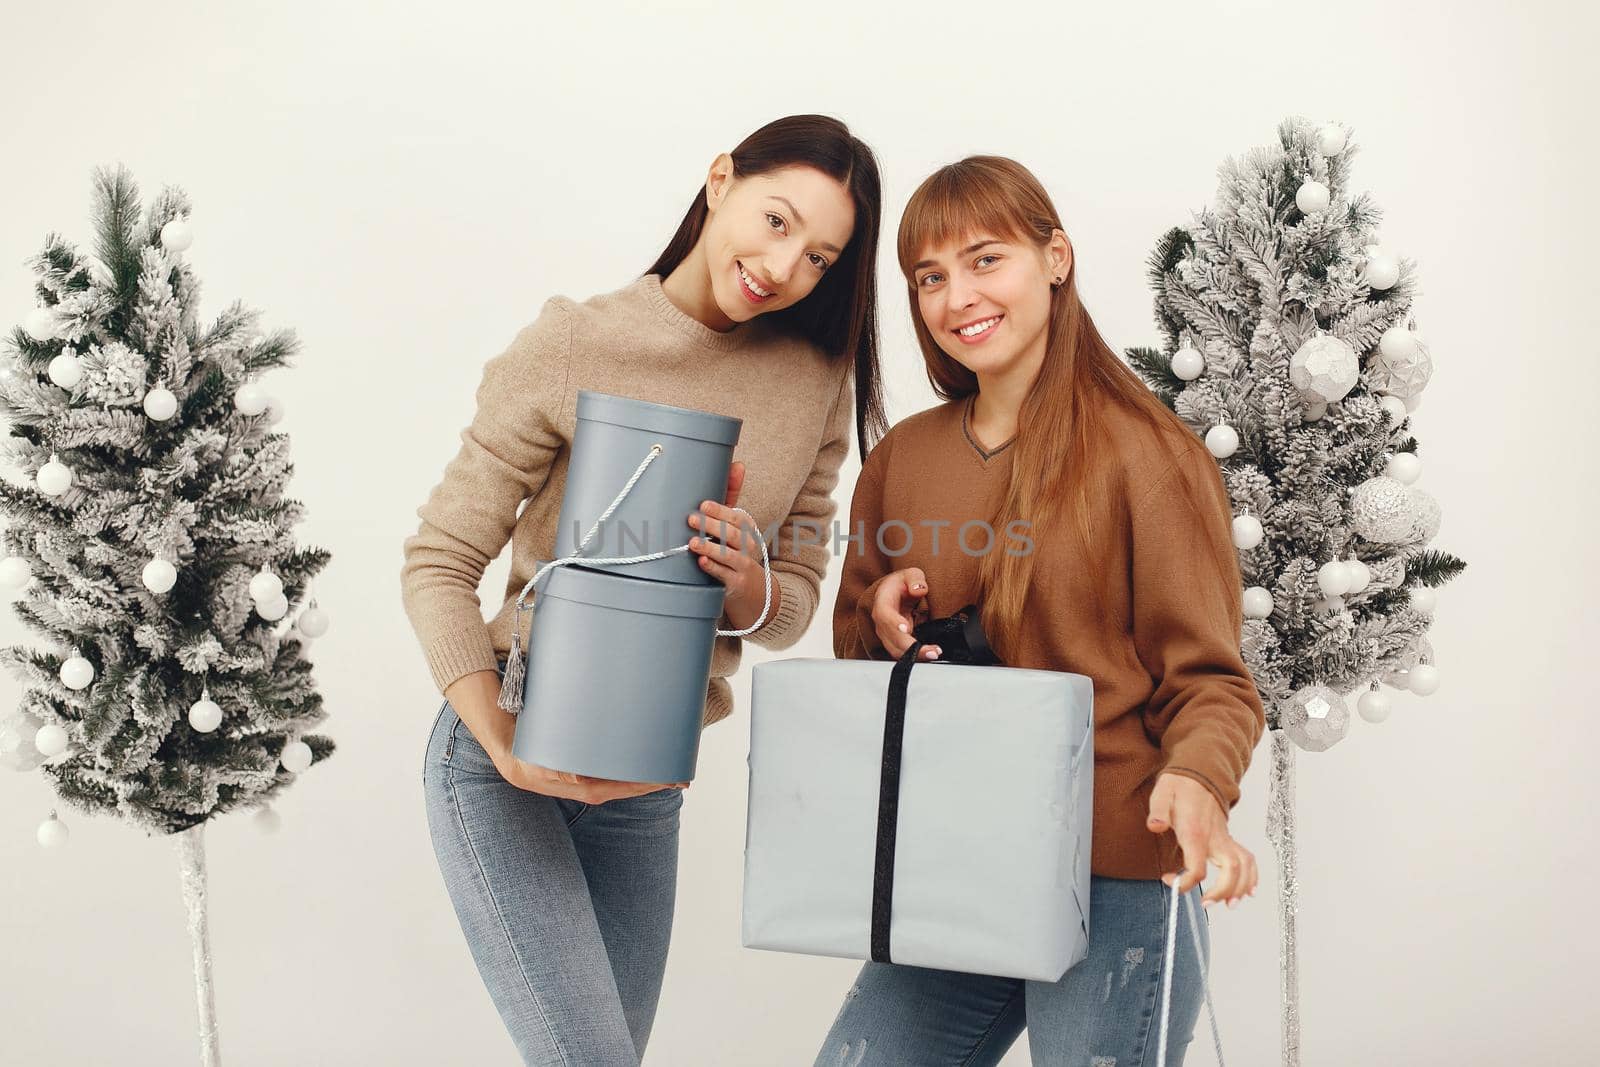 Women with presents. Girl in a brown sweater. Ladies in a studio.